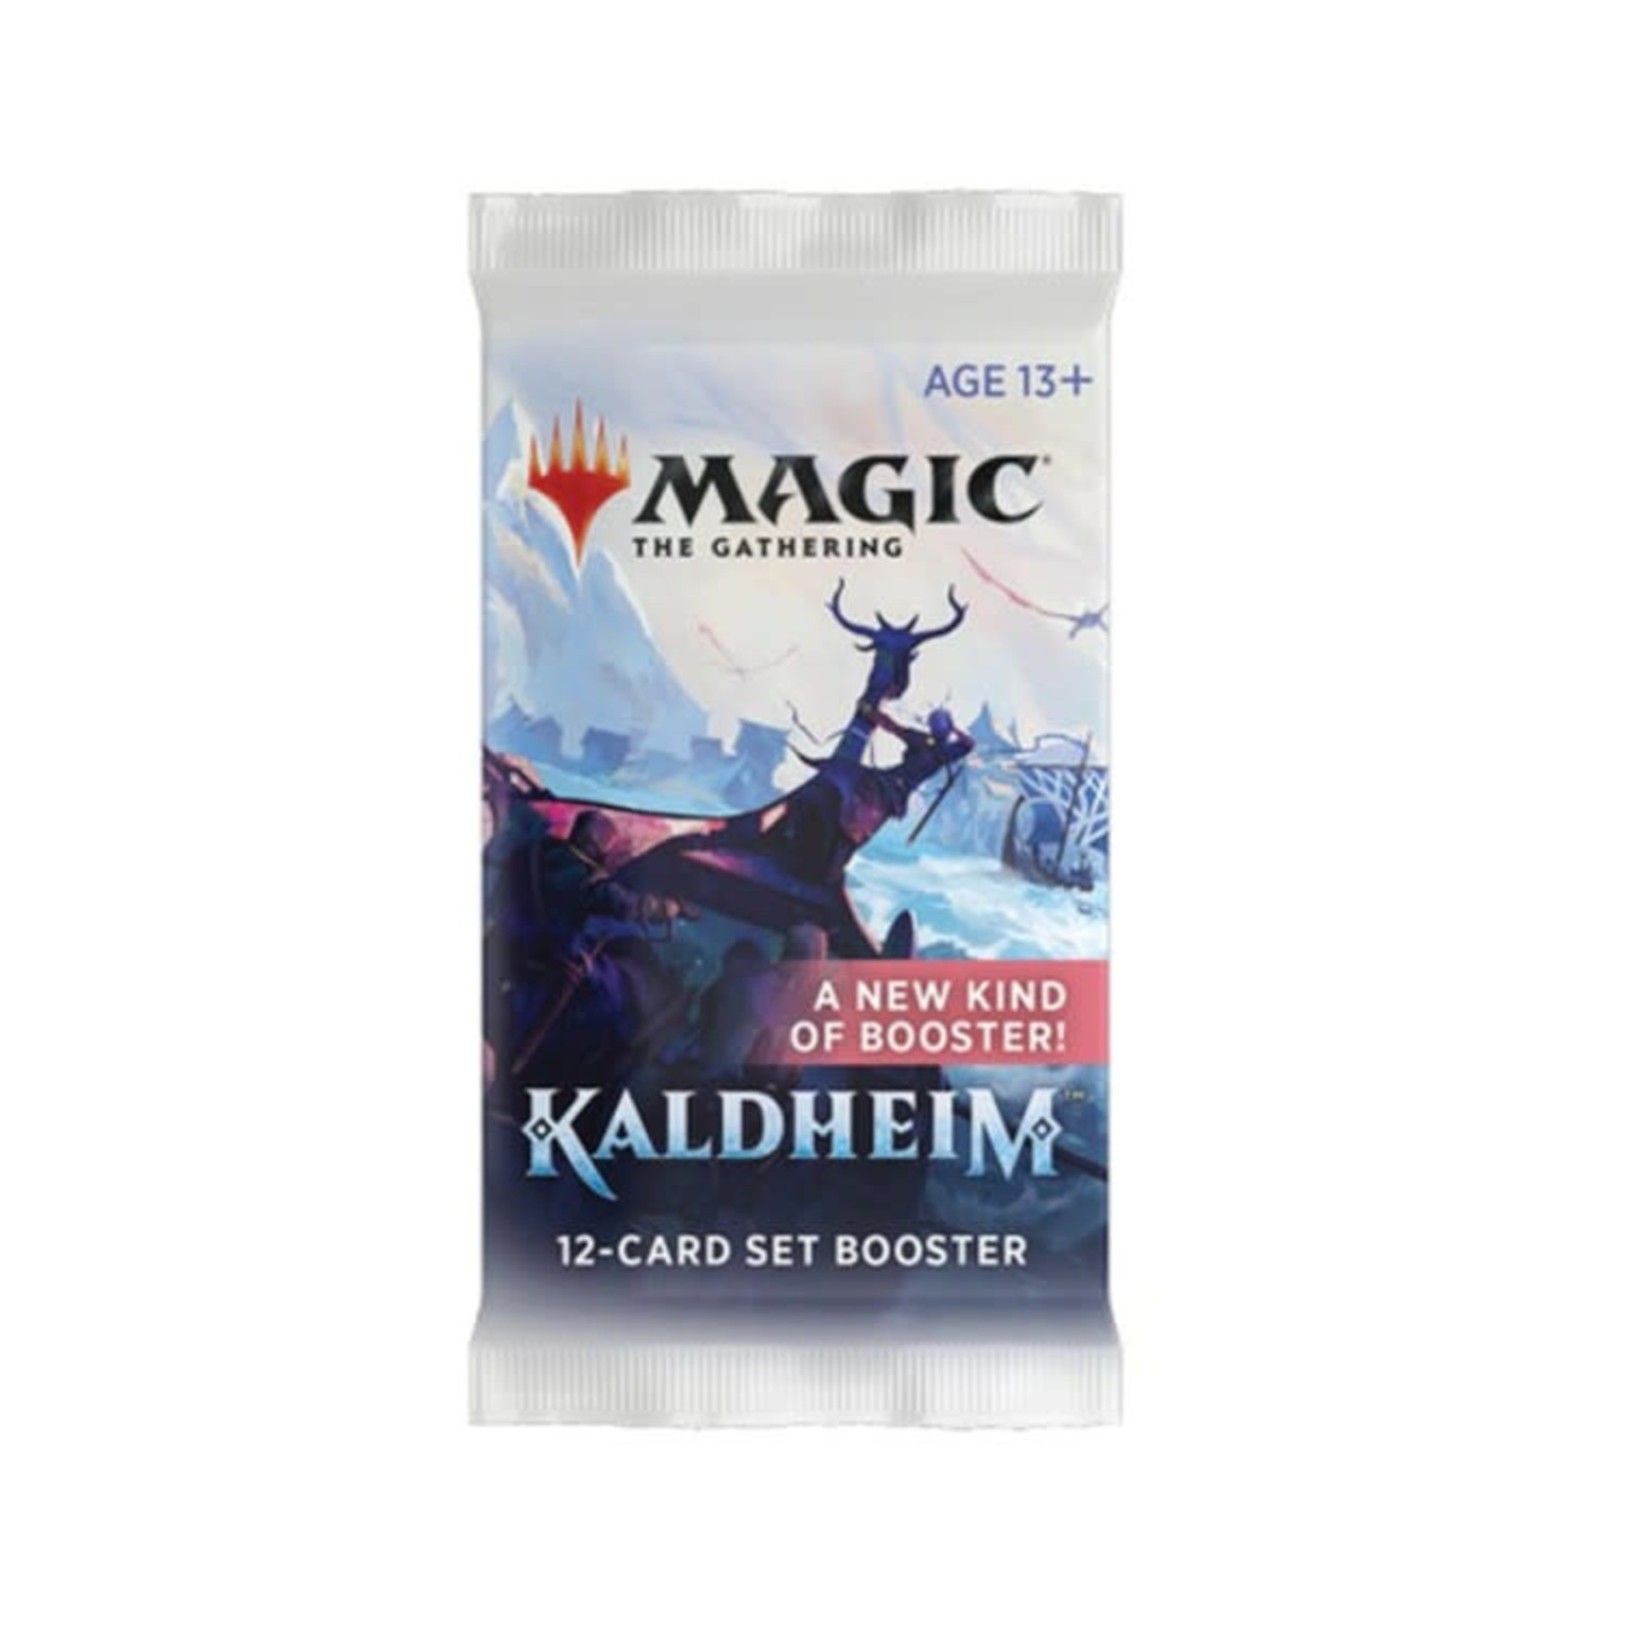 Wizards of the Coast Kaldheim Set Booster Pack